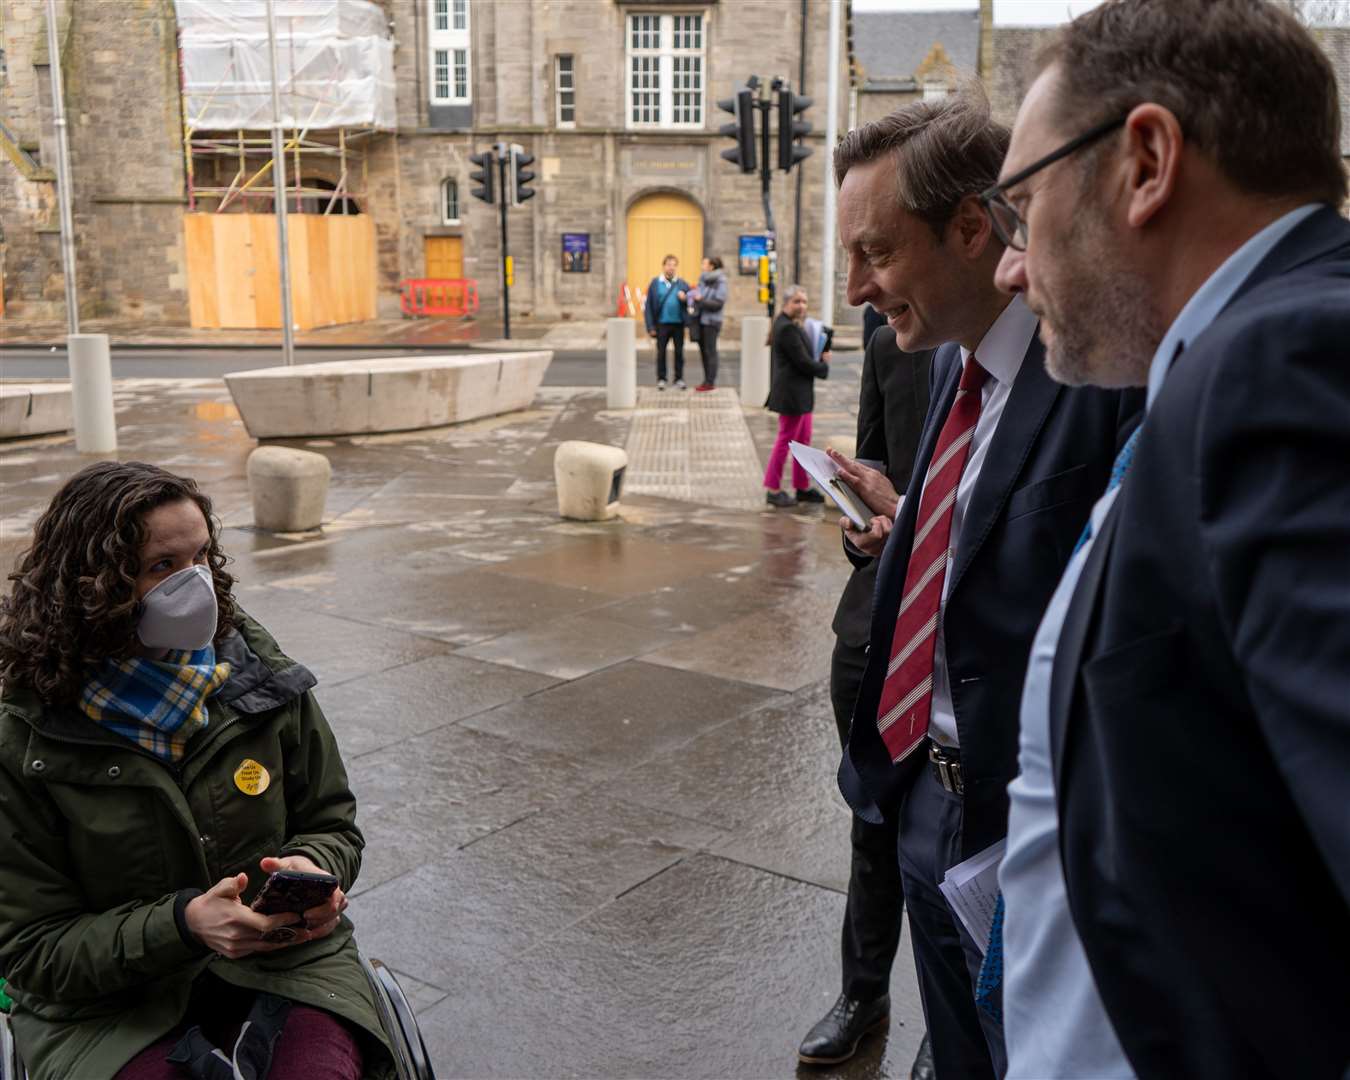 Douglas and Liam met campaigners outside Holyrood